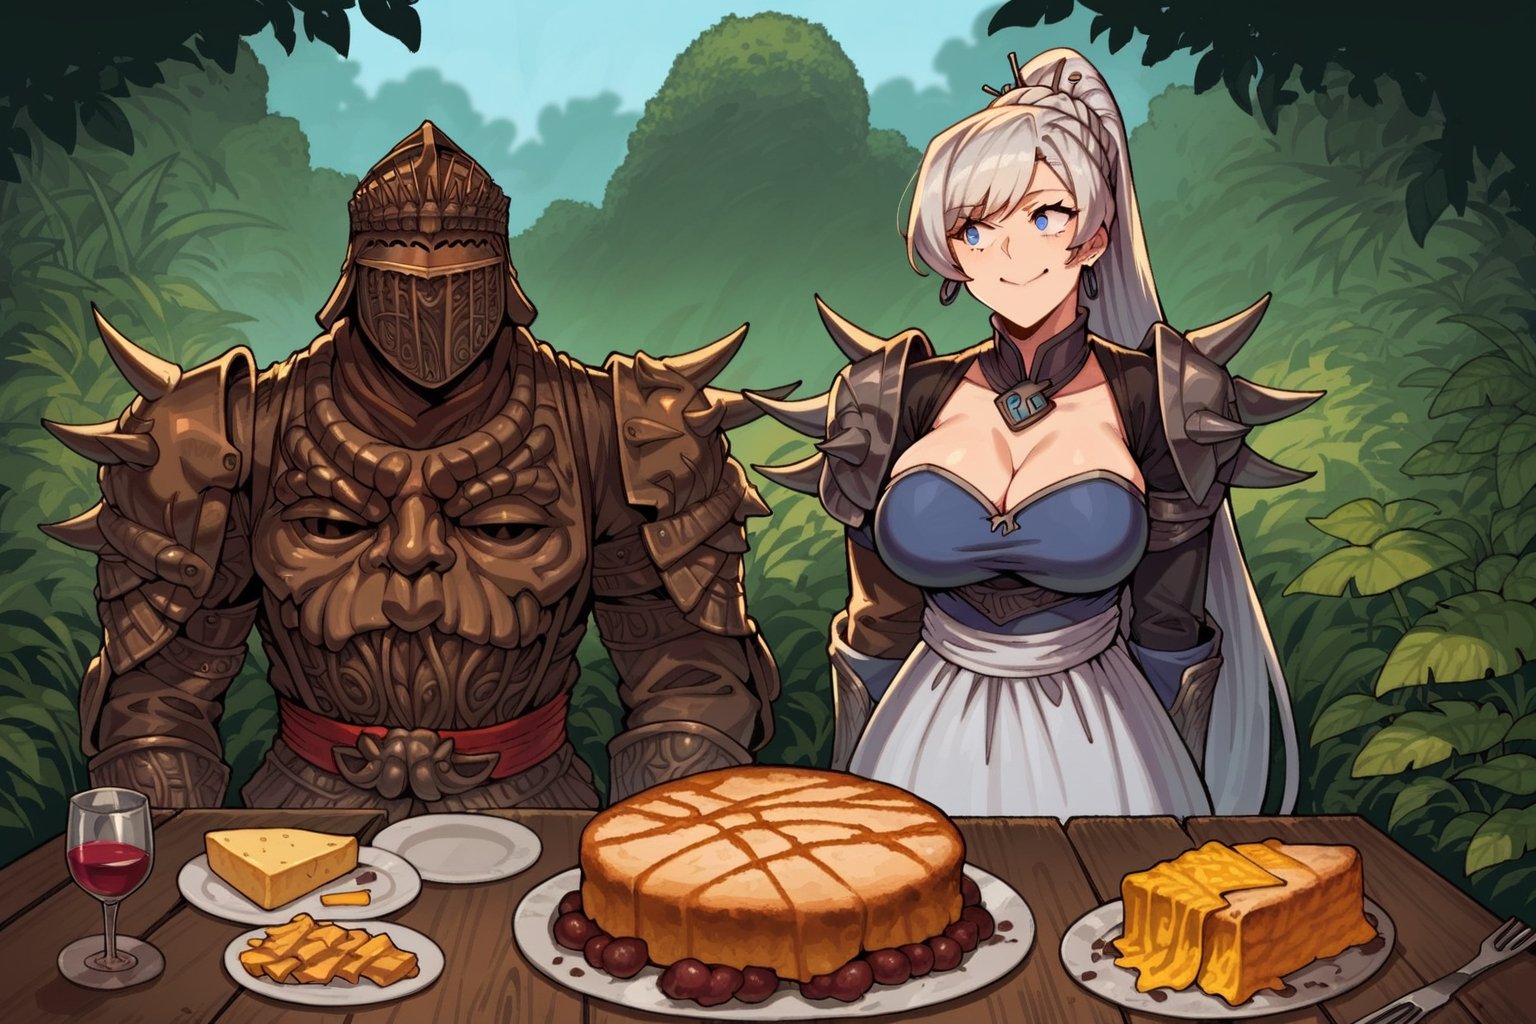 score_9, score_8, score_7, score_8_up, 1boy\(human, dark skin, giant, tall, wearing full madness Armor and helmet\) with 2girls\(big breasts, Yang Xiao Long and Weiss Schnee wearing dress, pregnant, happy, seductive\), both sitting and eating. (cooked meat, cheese and wine on the table), jungle, both staring at each other, score_7_up,booth